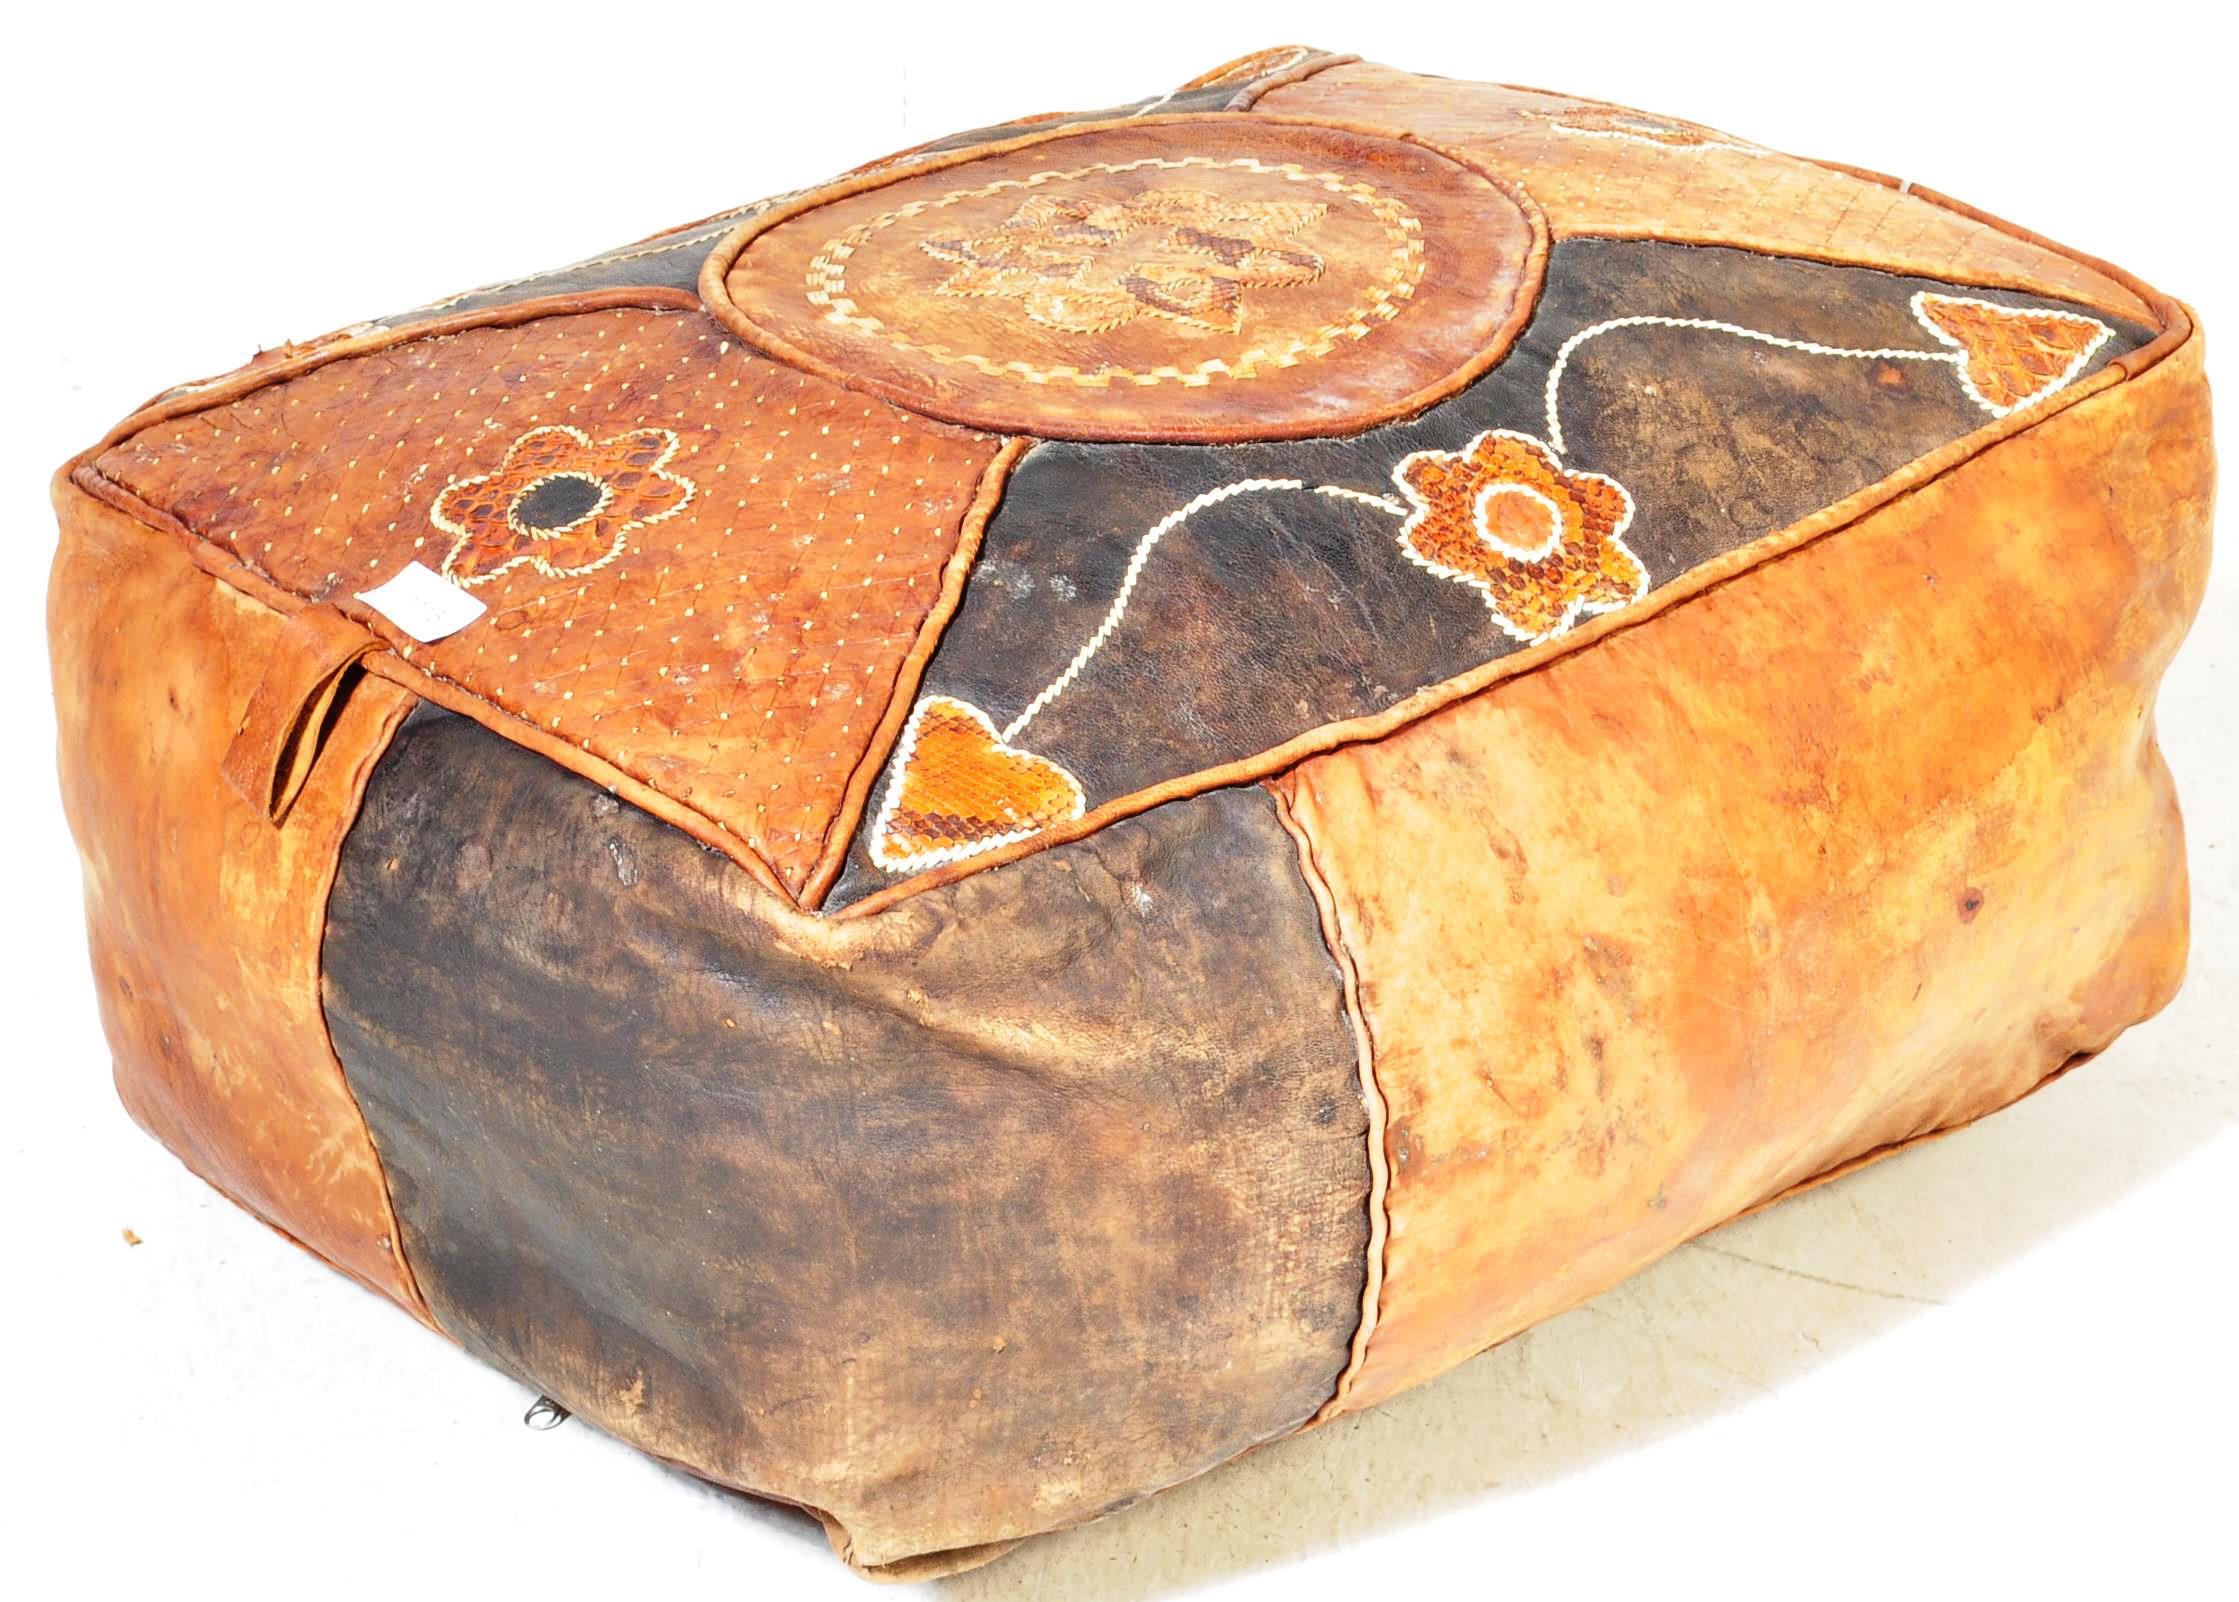 VINTAGE 20TH CENTURY LEATHER AND SNAKESKIN LEATHER POUFFE - Image 2 of 7